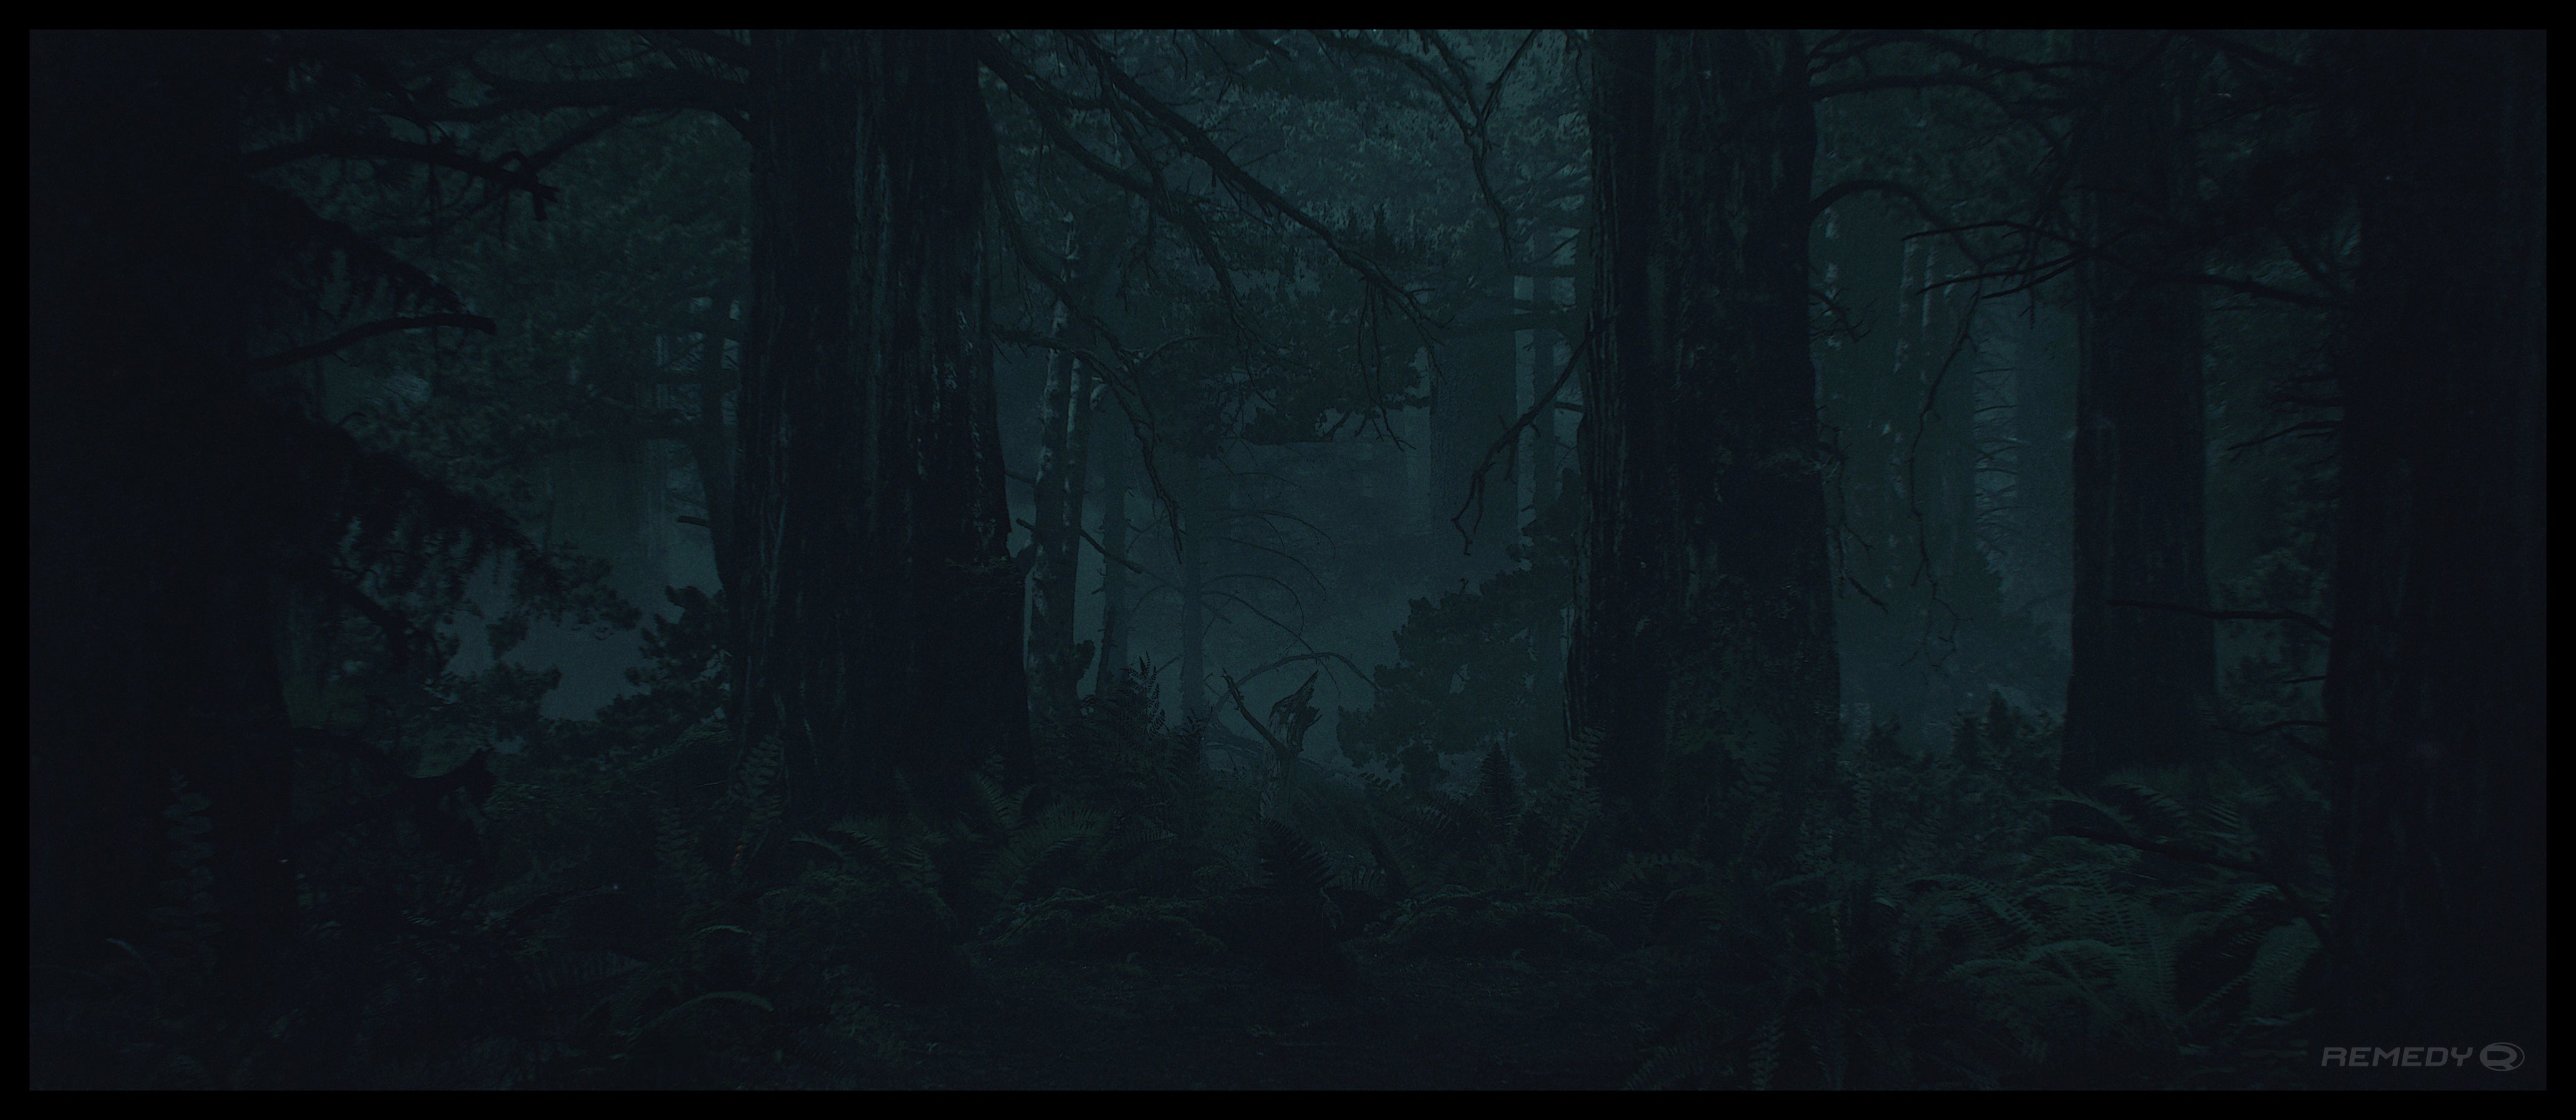 Alan Wake 2 concept art showing a moody forest at night.